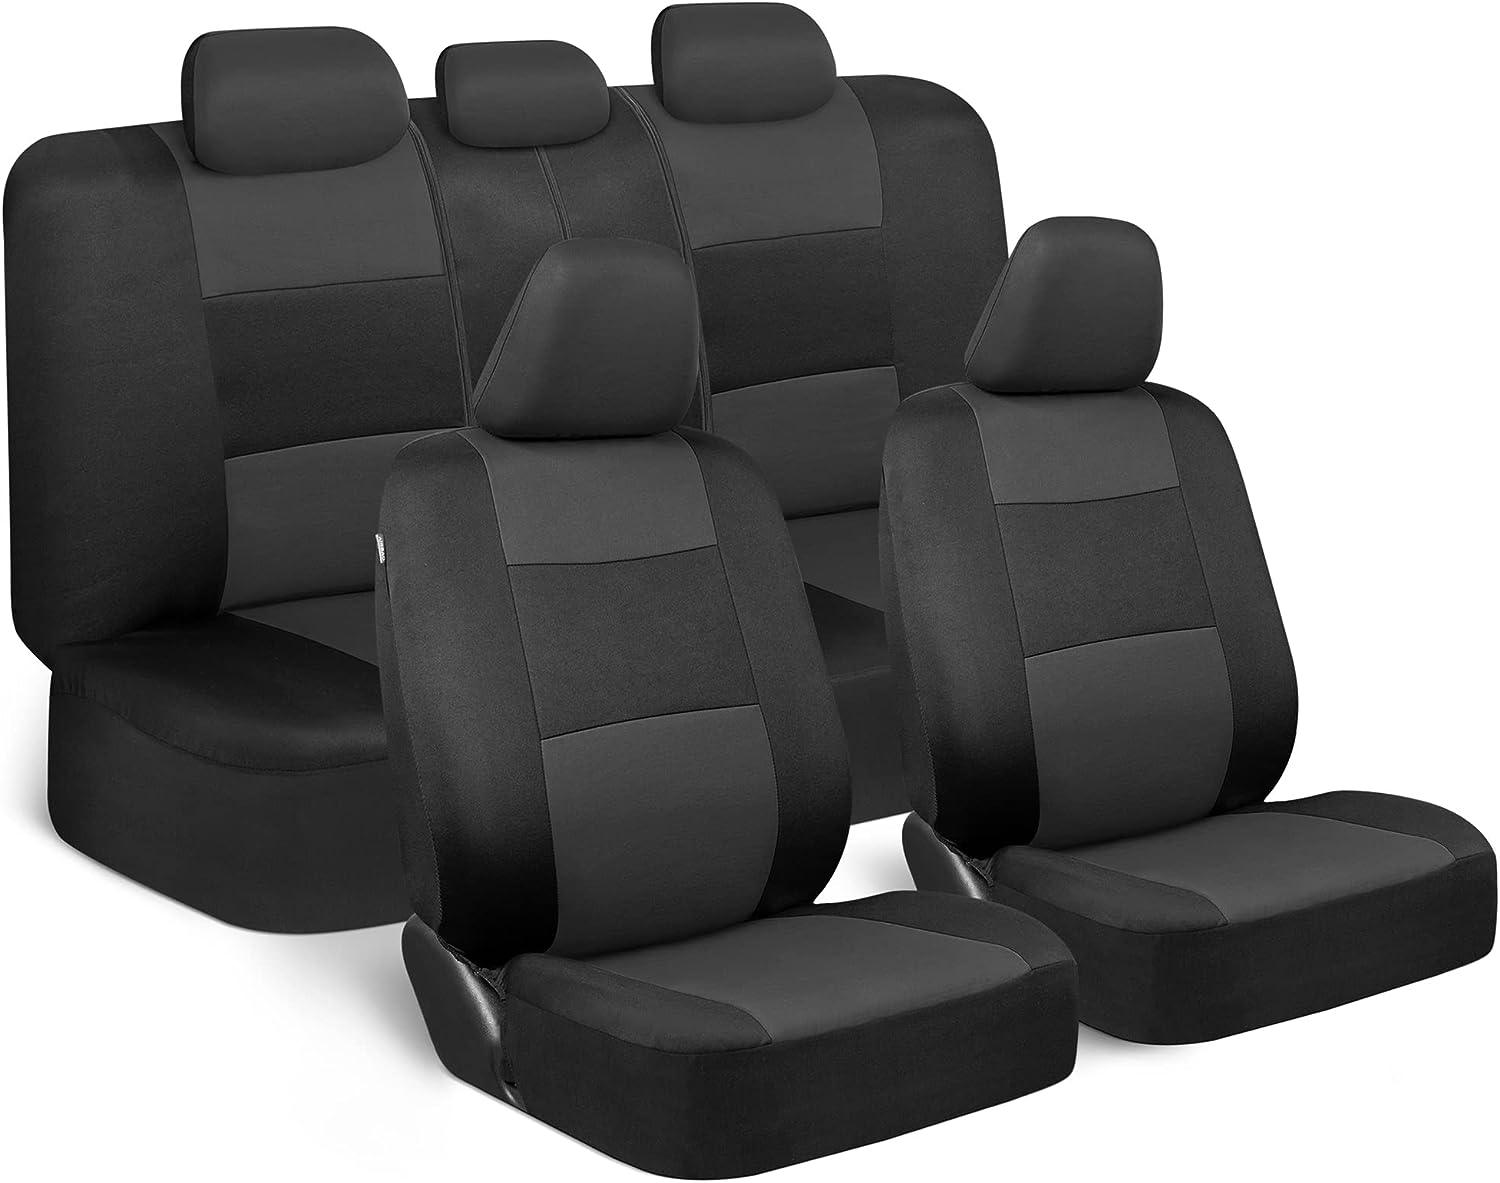 Car Seat Cover Set in Charcoal and Black - Full Set with Front and Rear Split Bench - Universal Fit for Cars, Trucks, Vans, SUVs Automotive Parts and Accessories Visit the BDK Store   